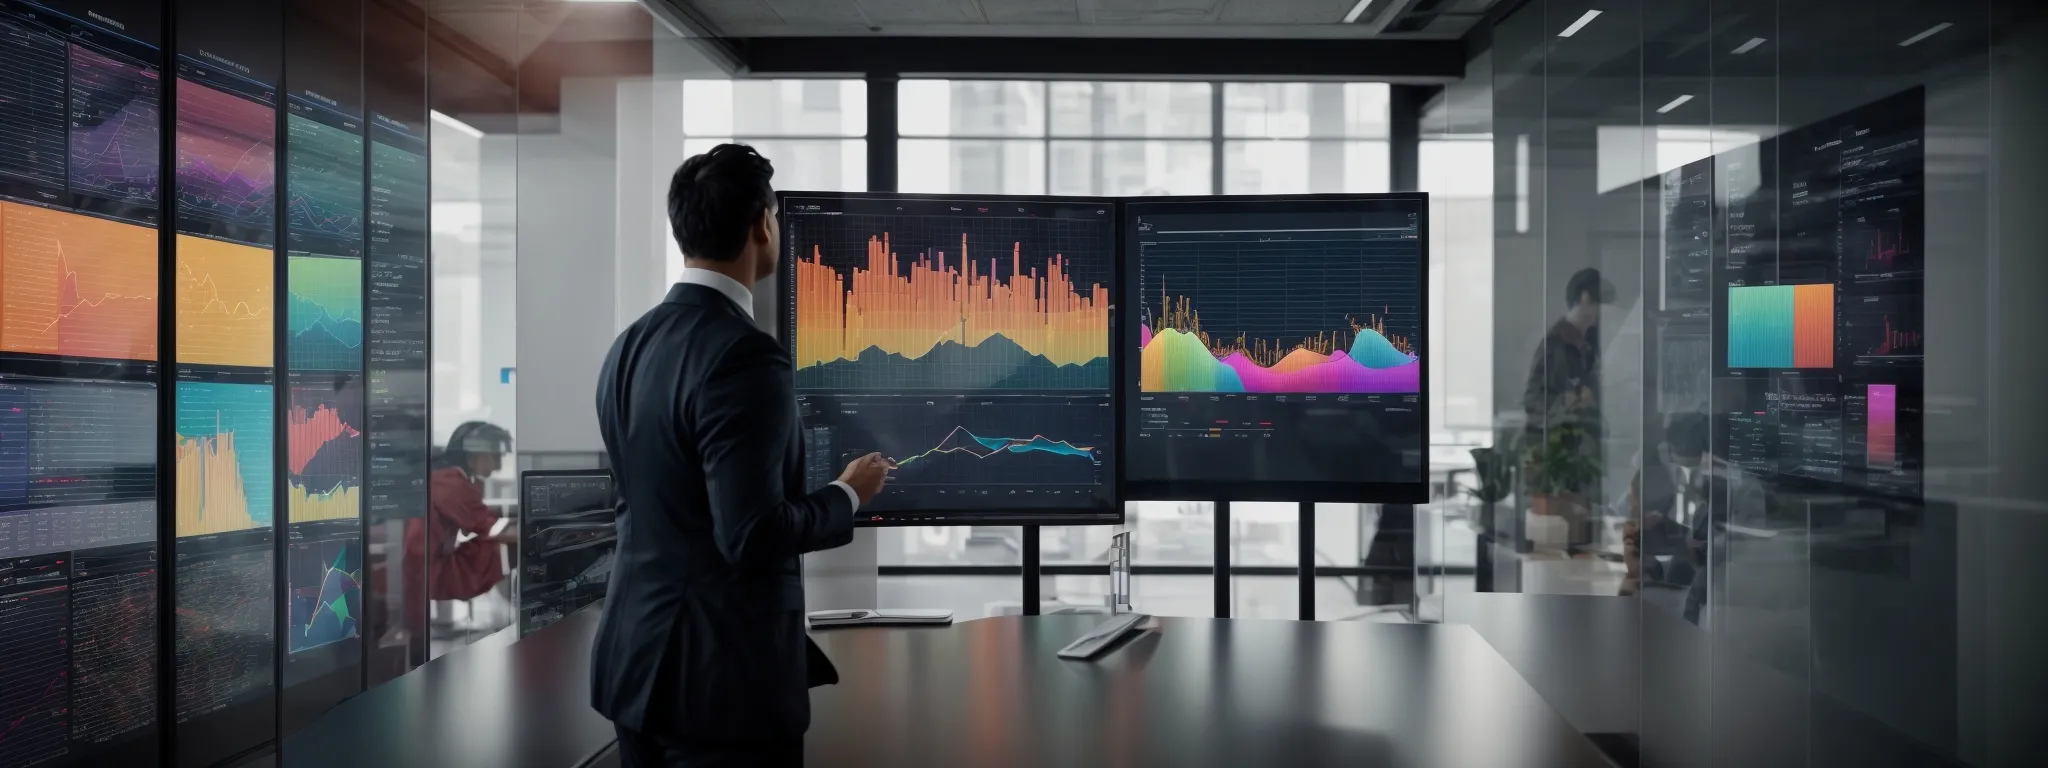 a trio of professionals interact with a large, interactive touchscreen displaying colorful graphs and data analytics in a modern, sleek office environment.